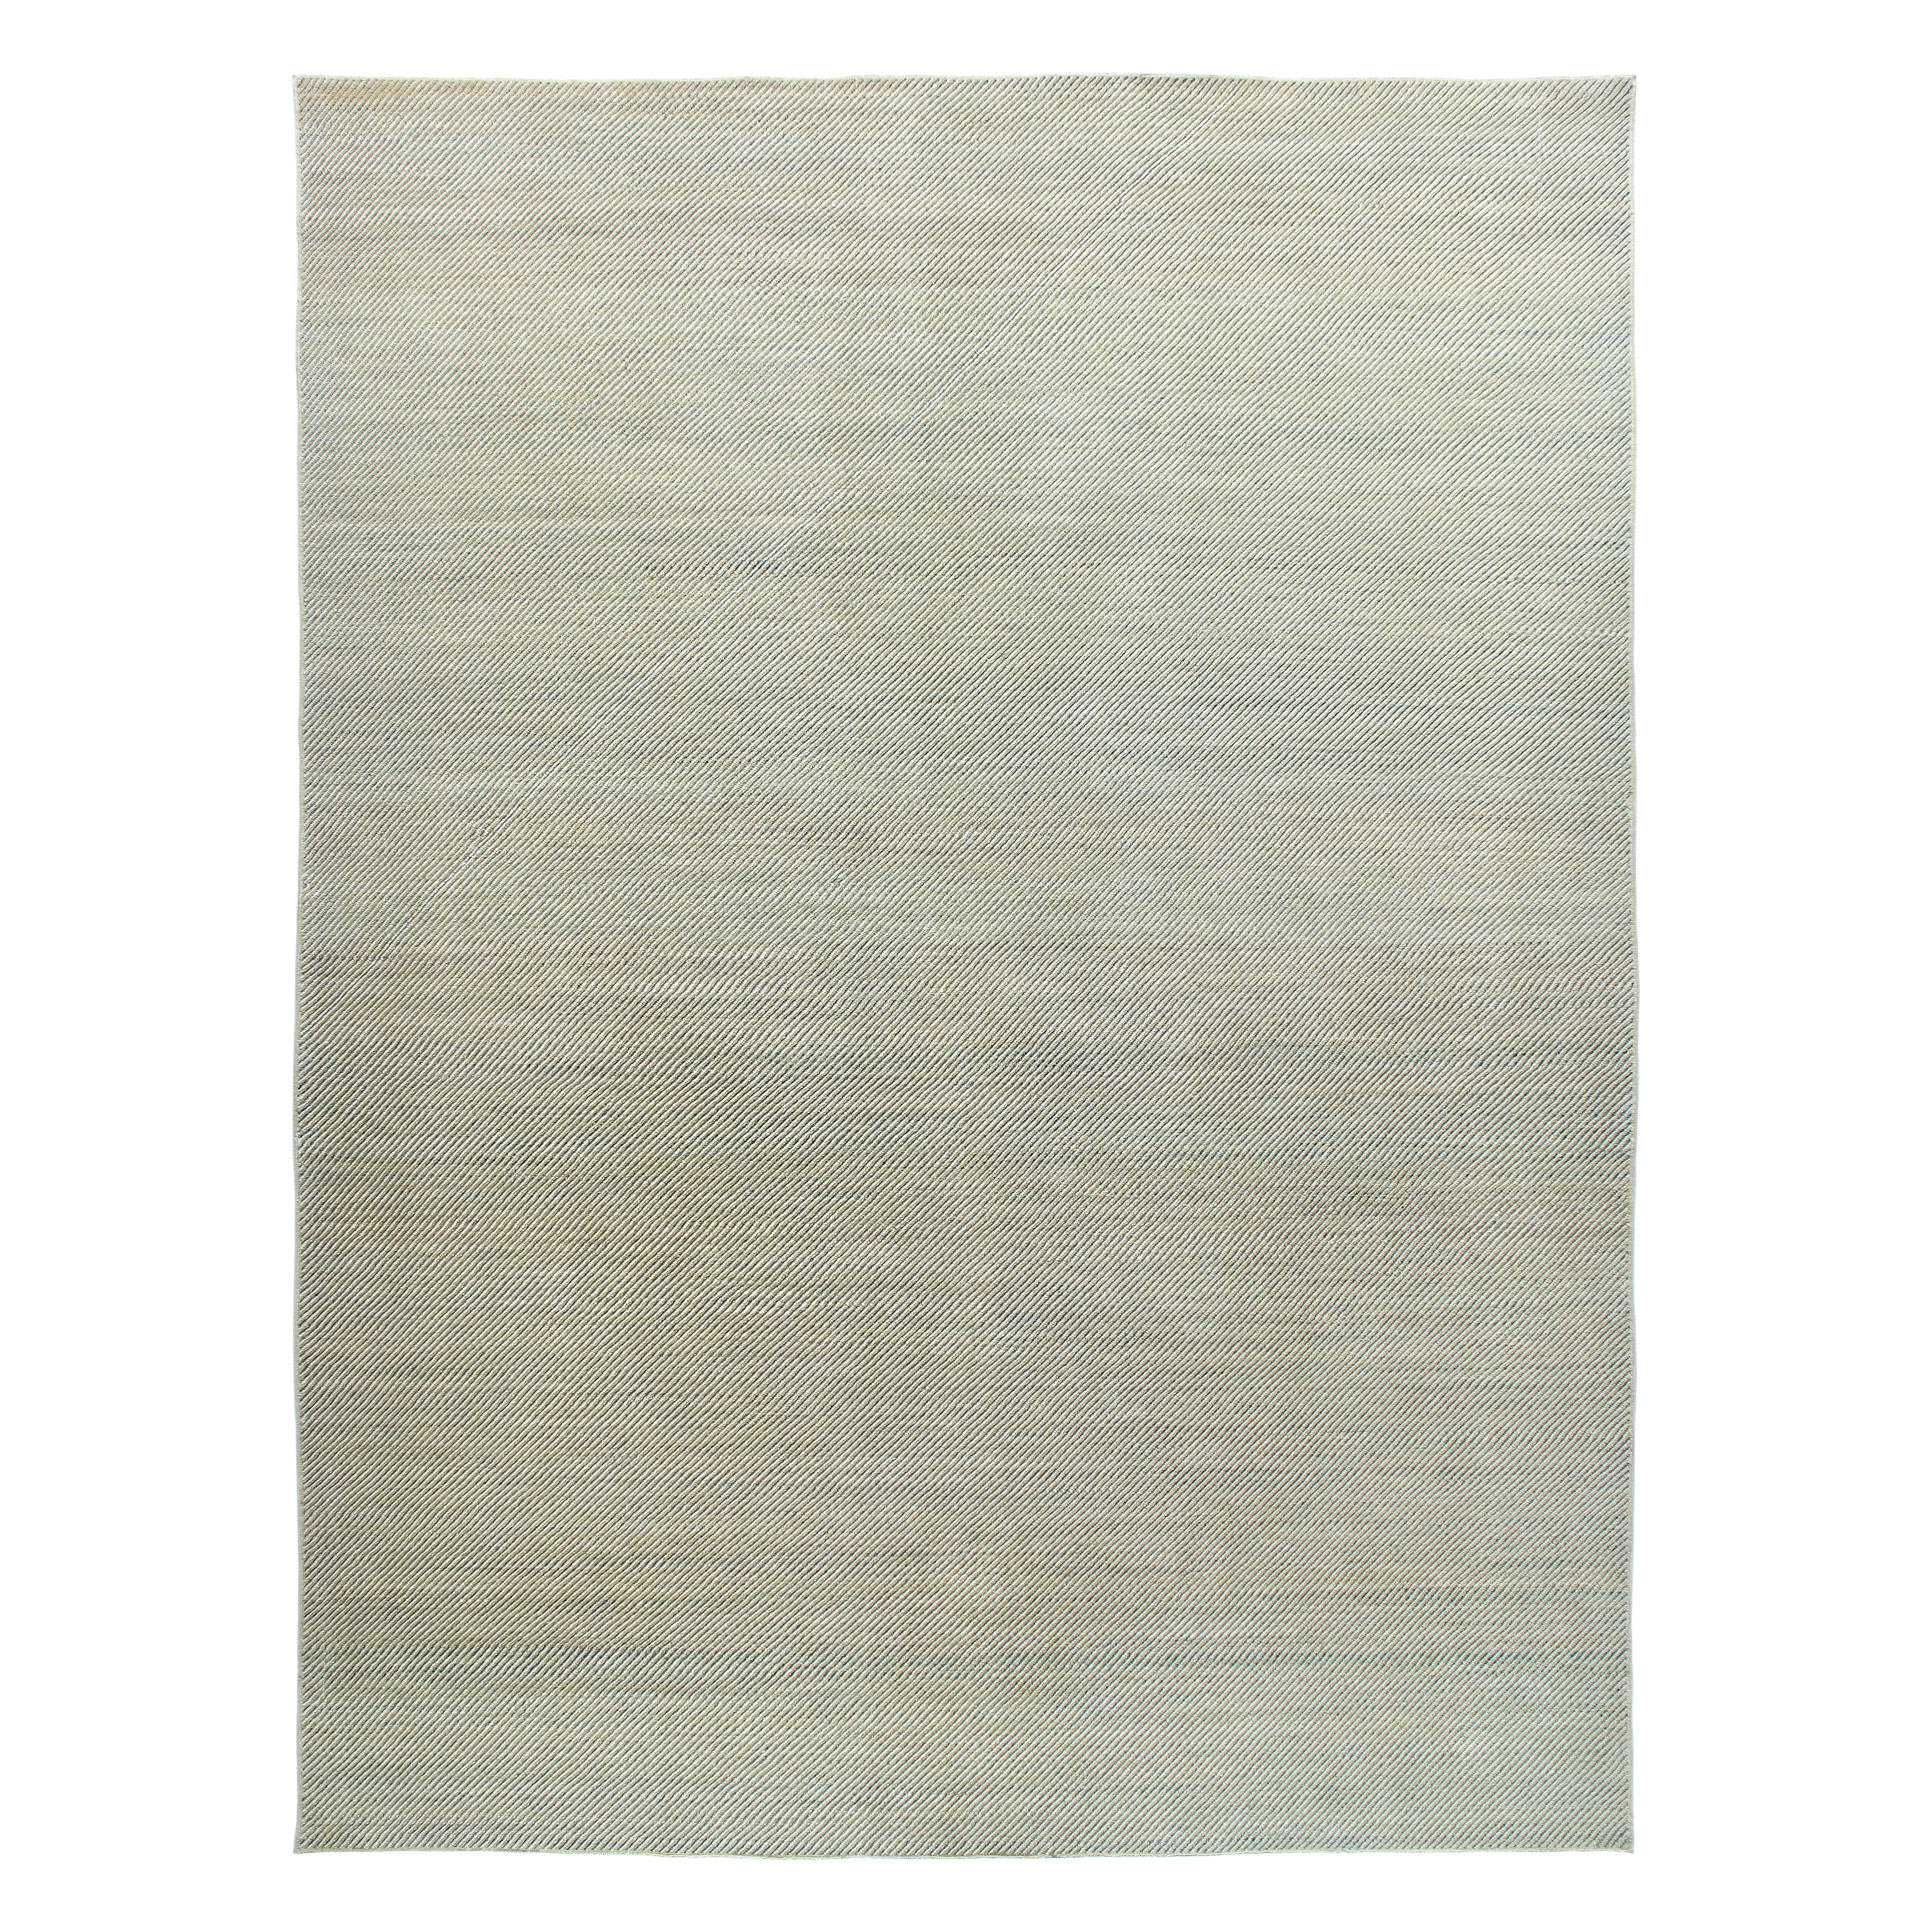 This Modern rug is handknotted from the finest hand-carded, hand-spun, naturally dyed wool.